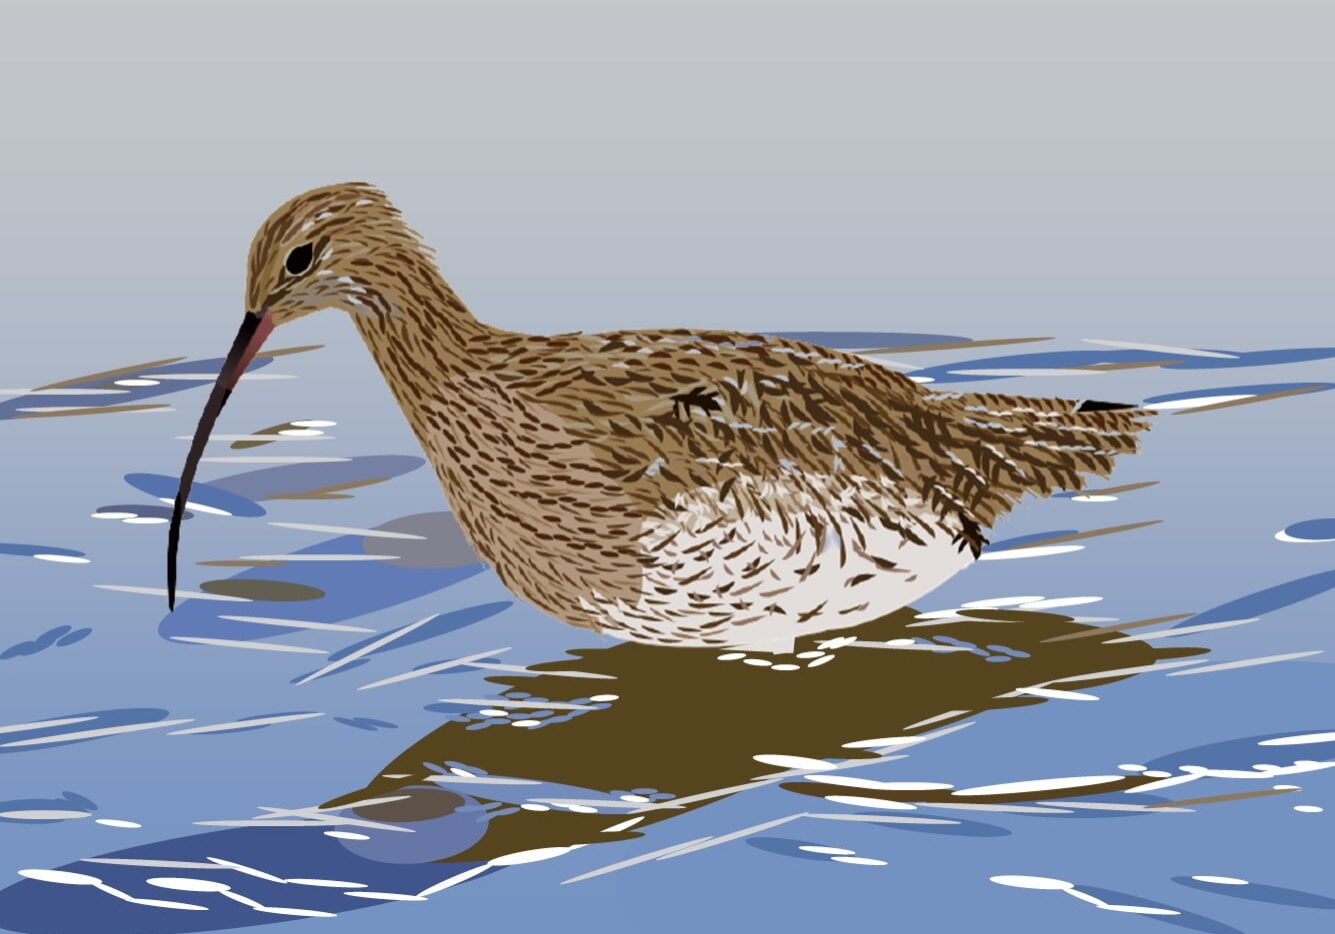 Curlew Wading (James Currell)